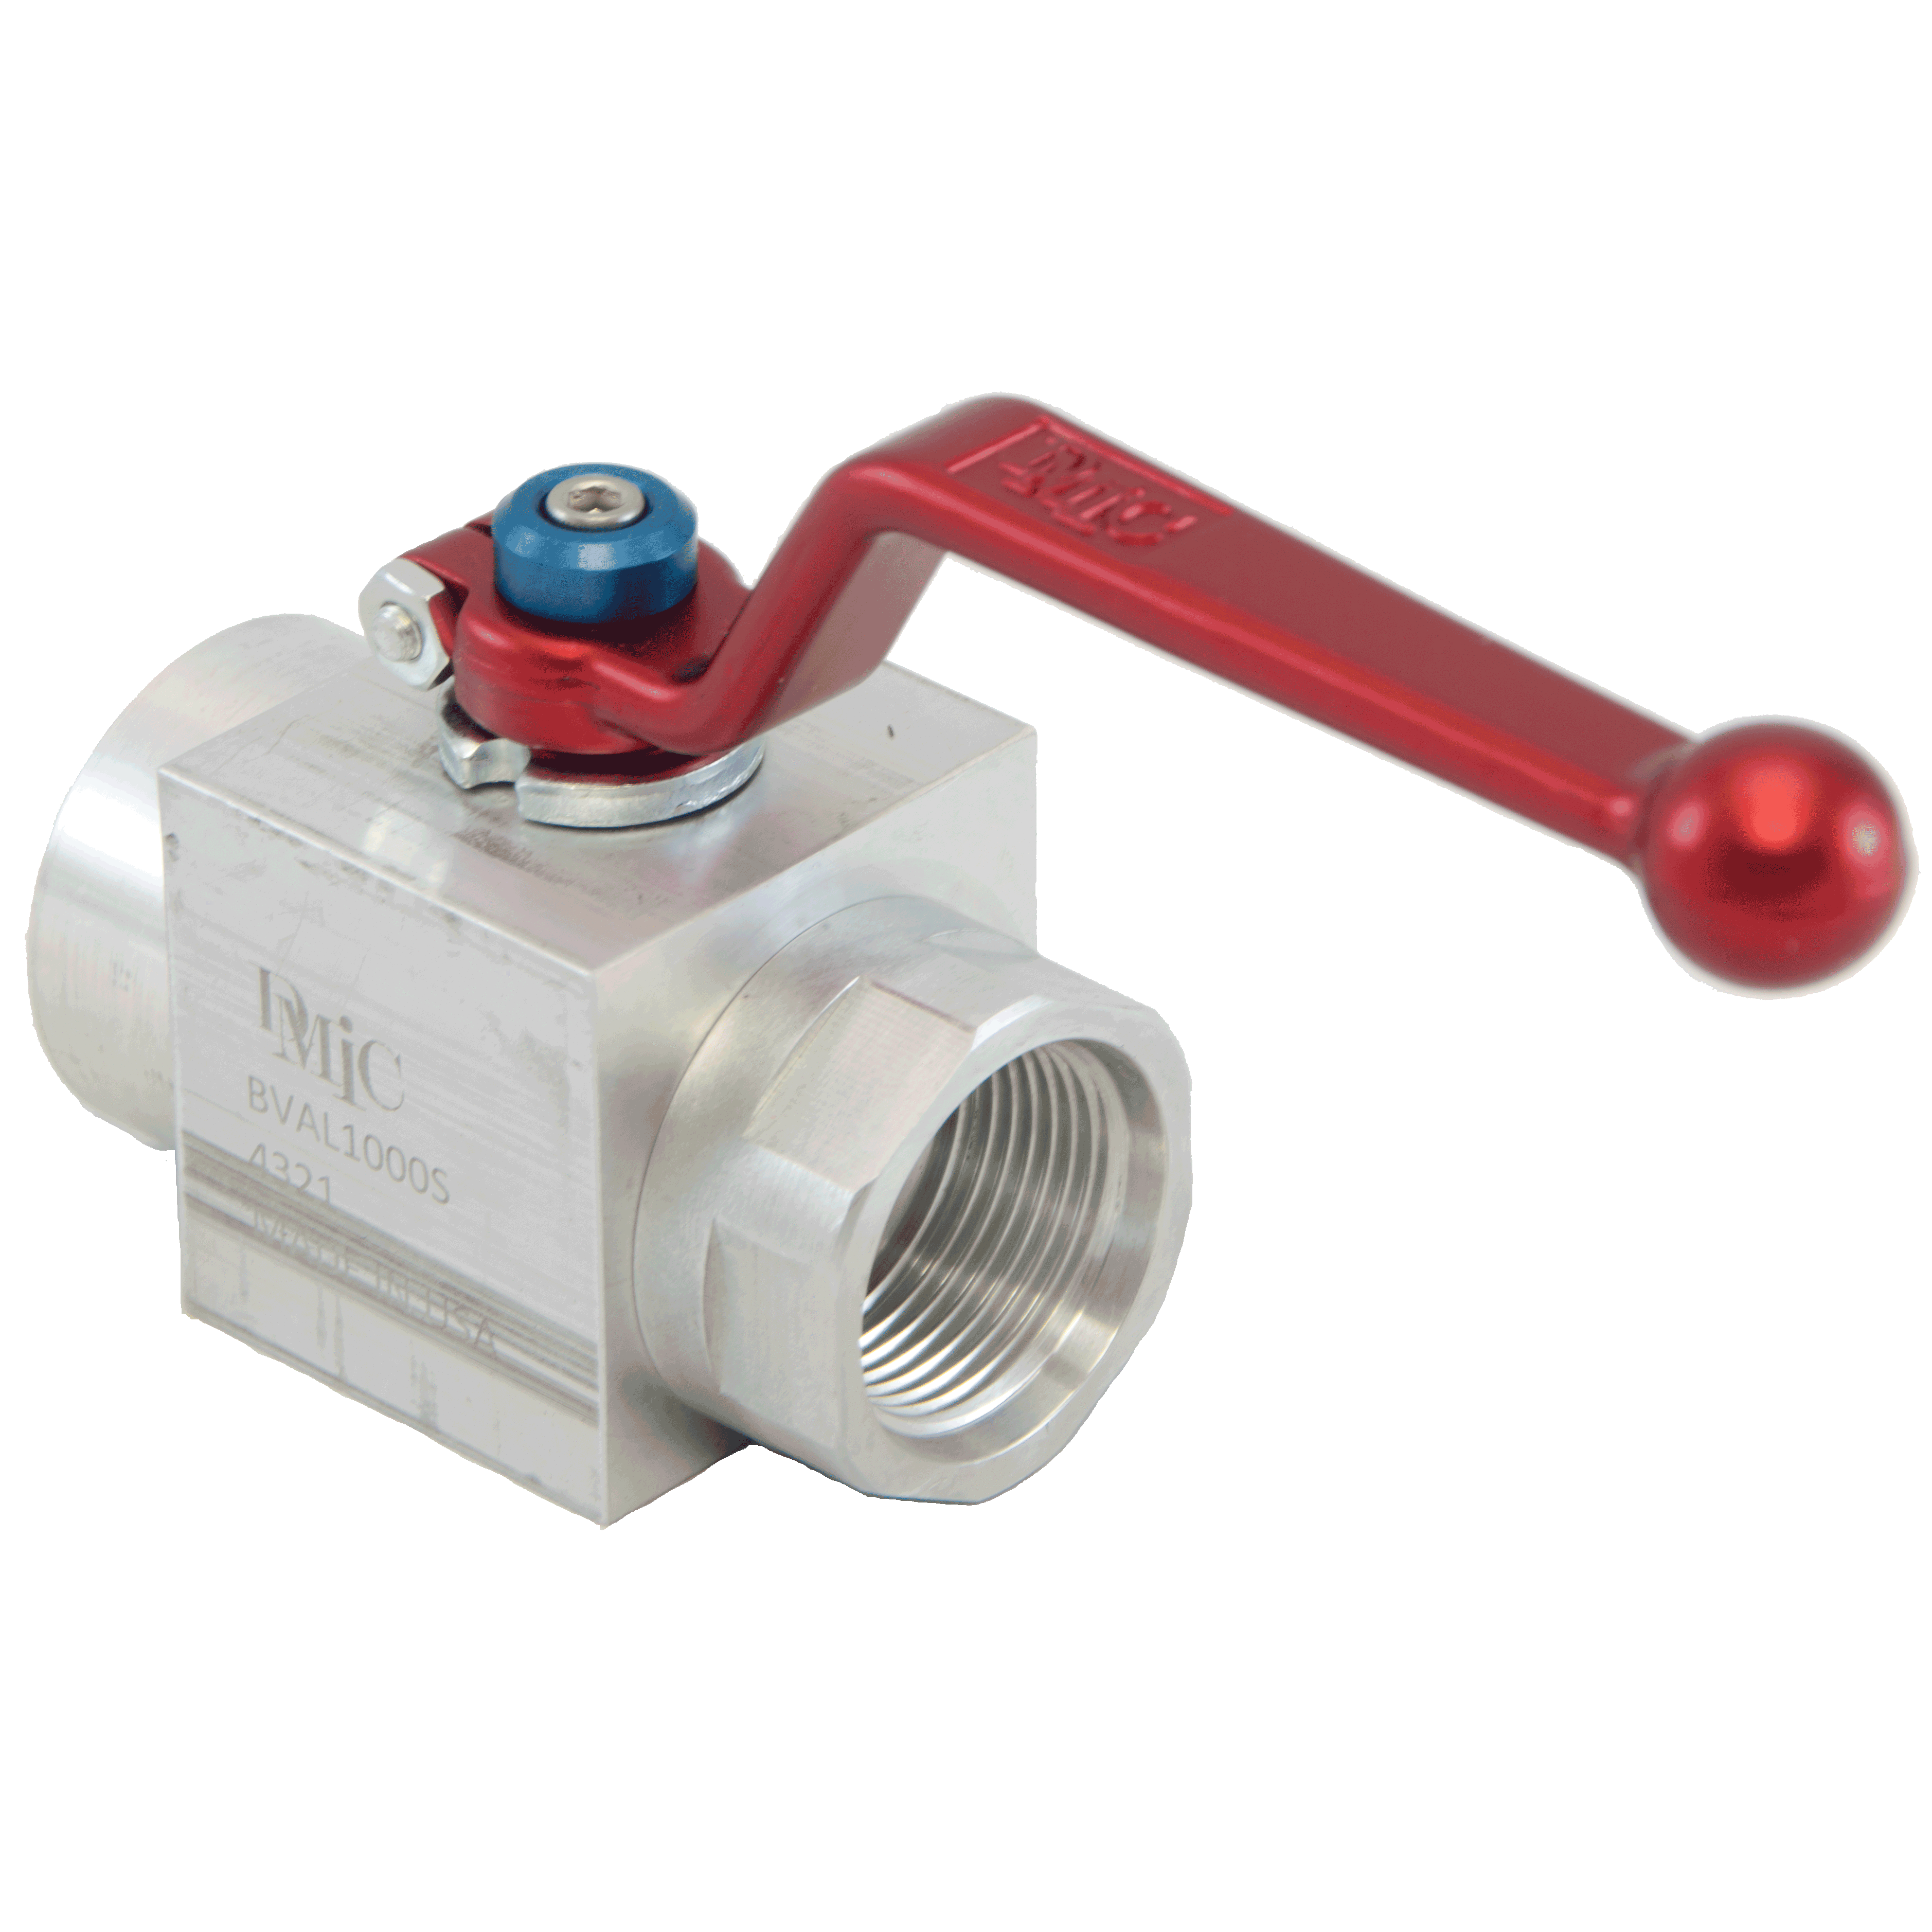 BVAL-0375N-4321 : DMIC Suction Ball Valve, 3/8 NPT, Aluminum, 600psi, Two-Way